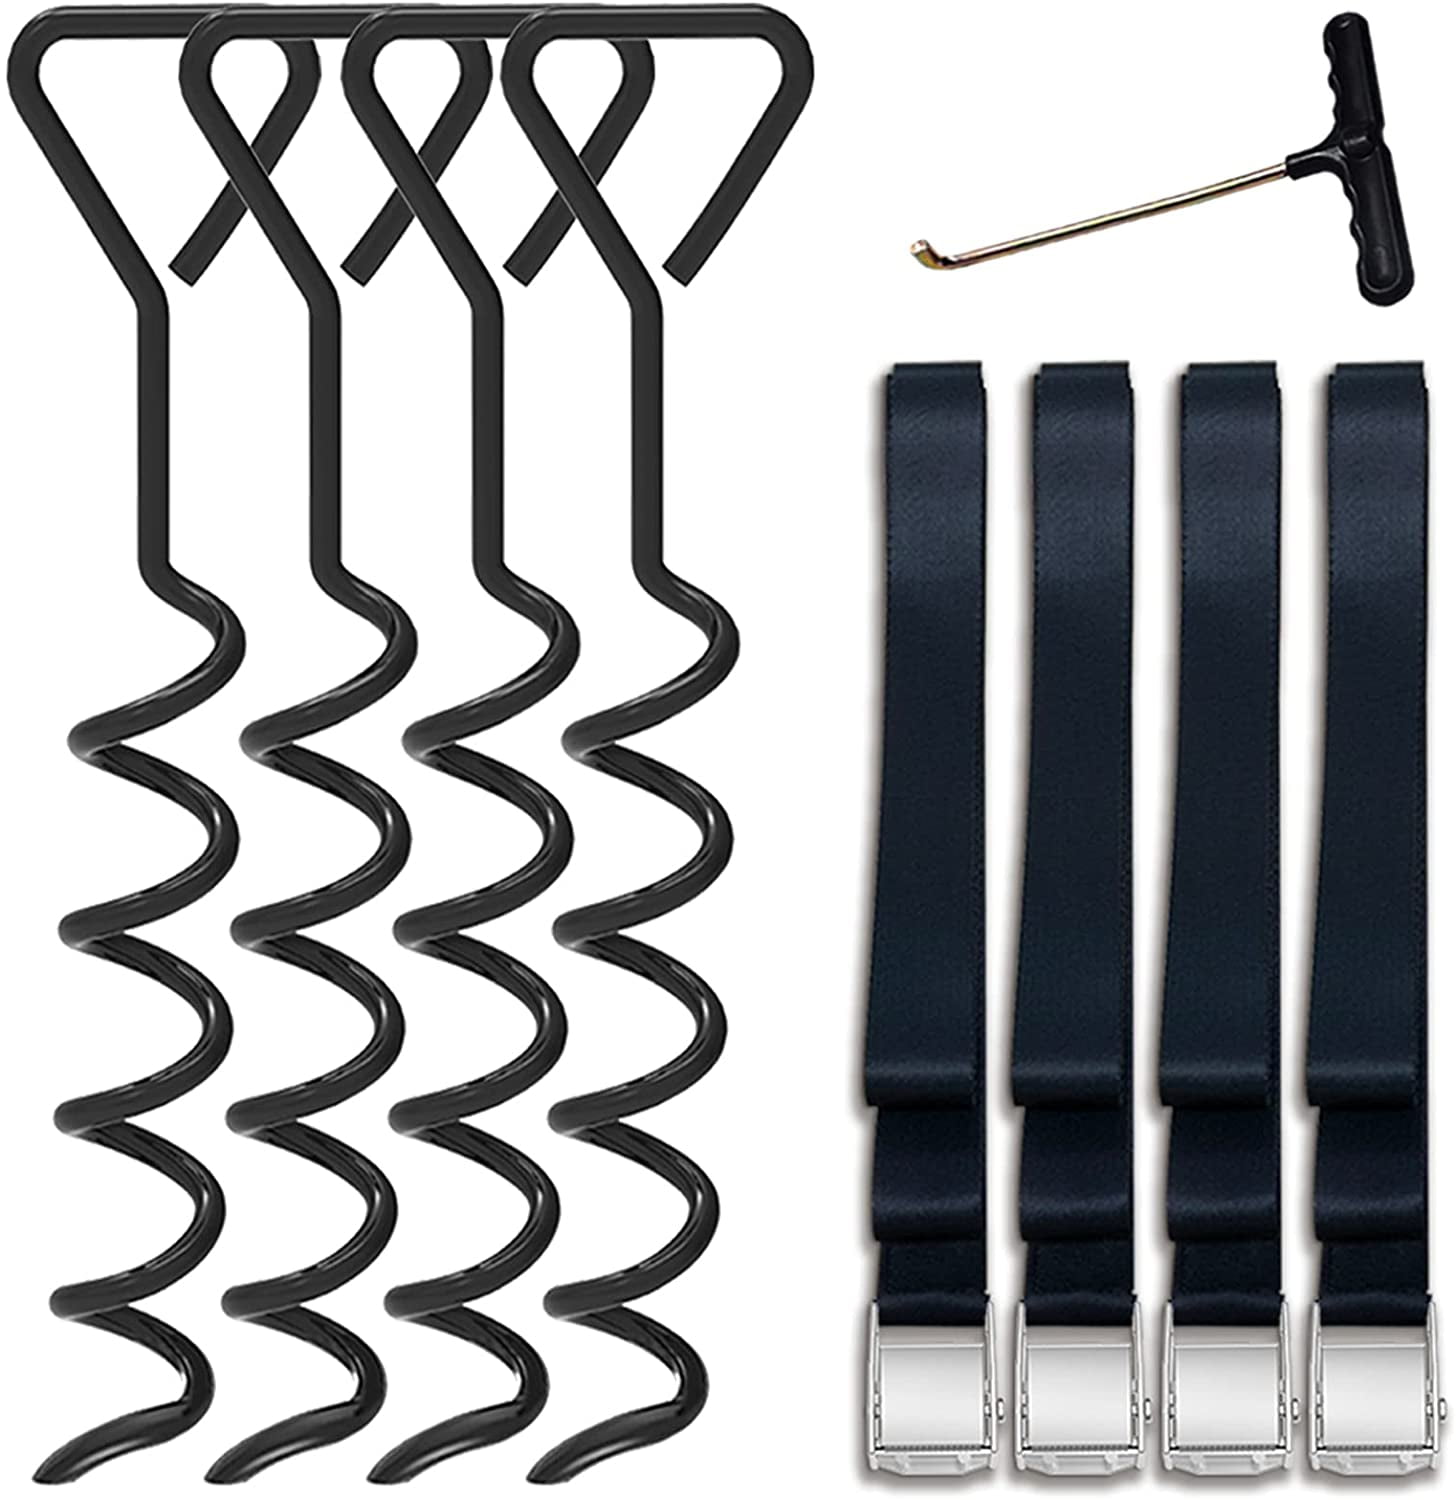 Black Trampoline Stake Anchor Corkscrew Shape Steel Stakes Anchor Kit Spiral Ground Anchors Trampoline Part 8 Pack 